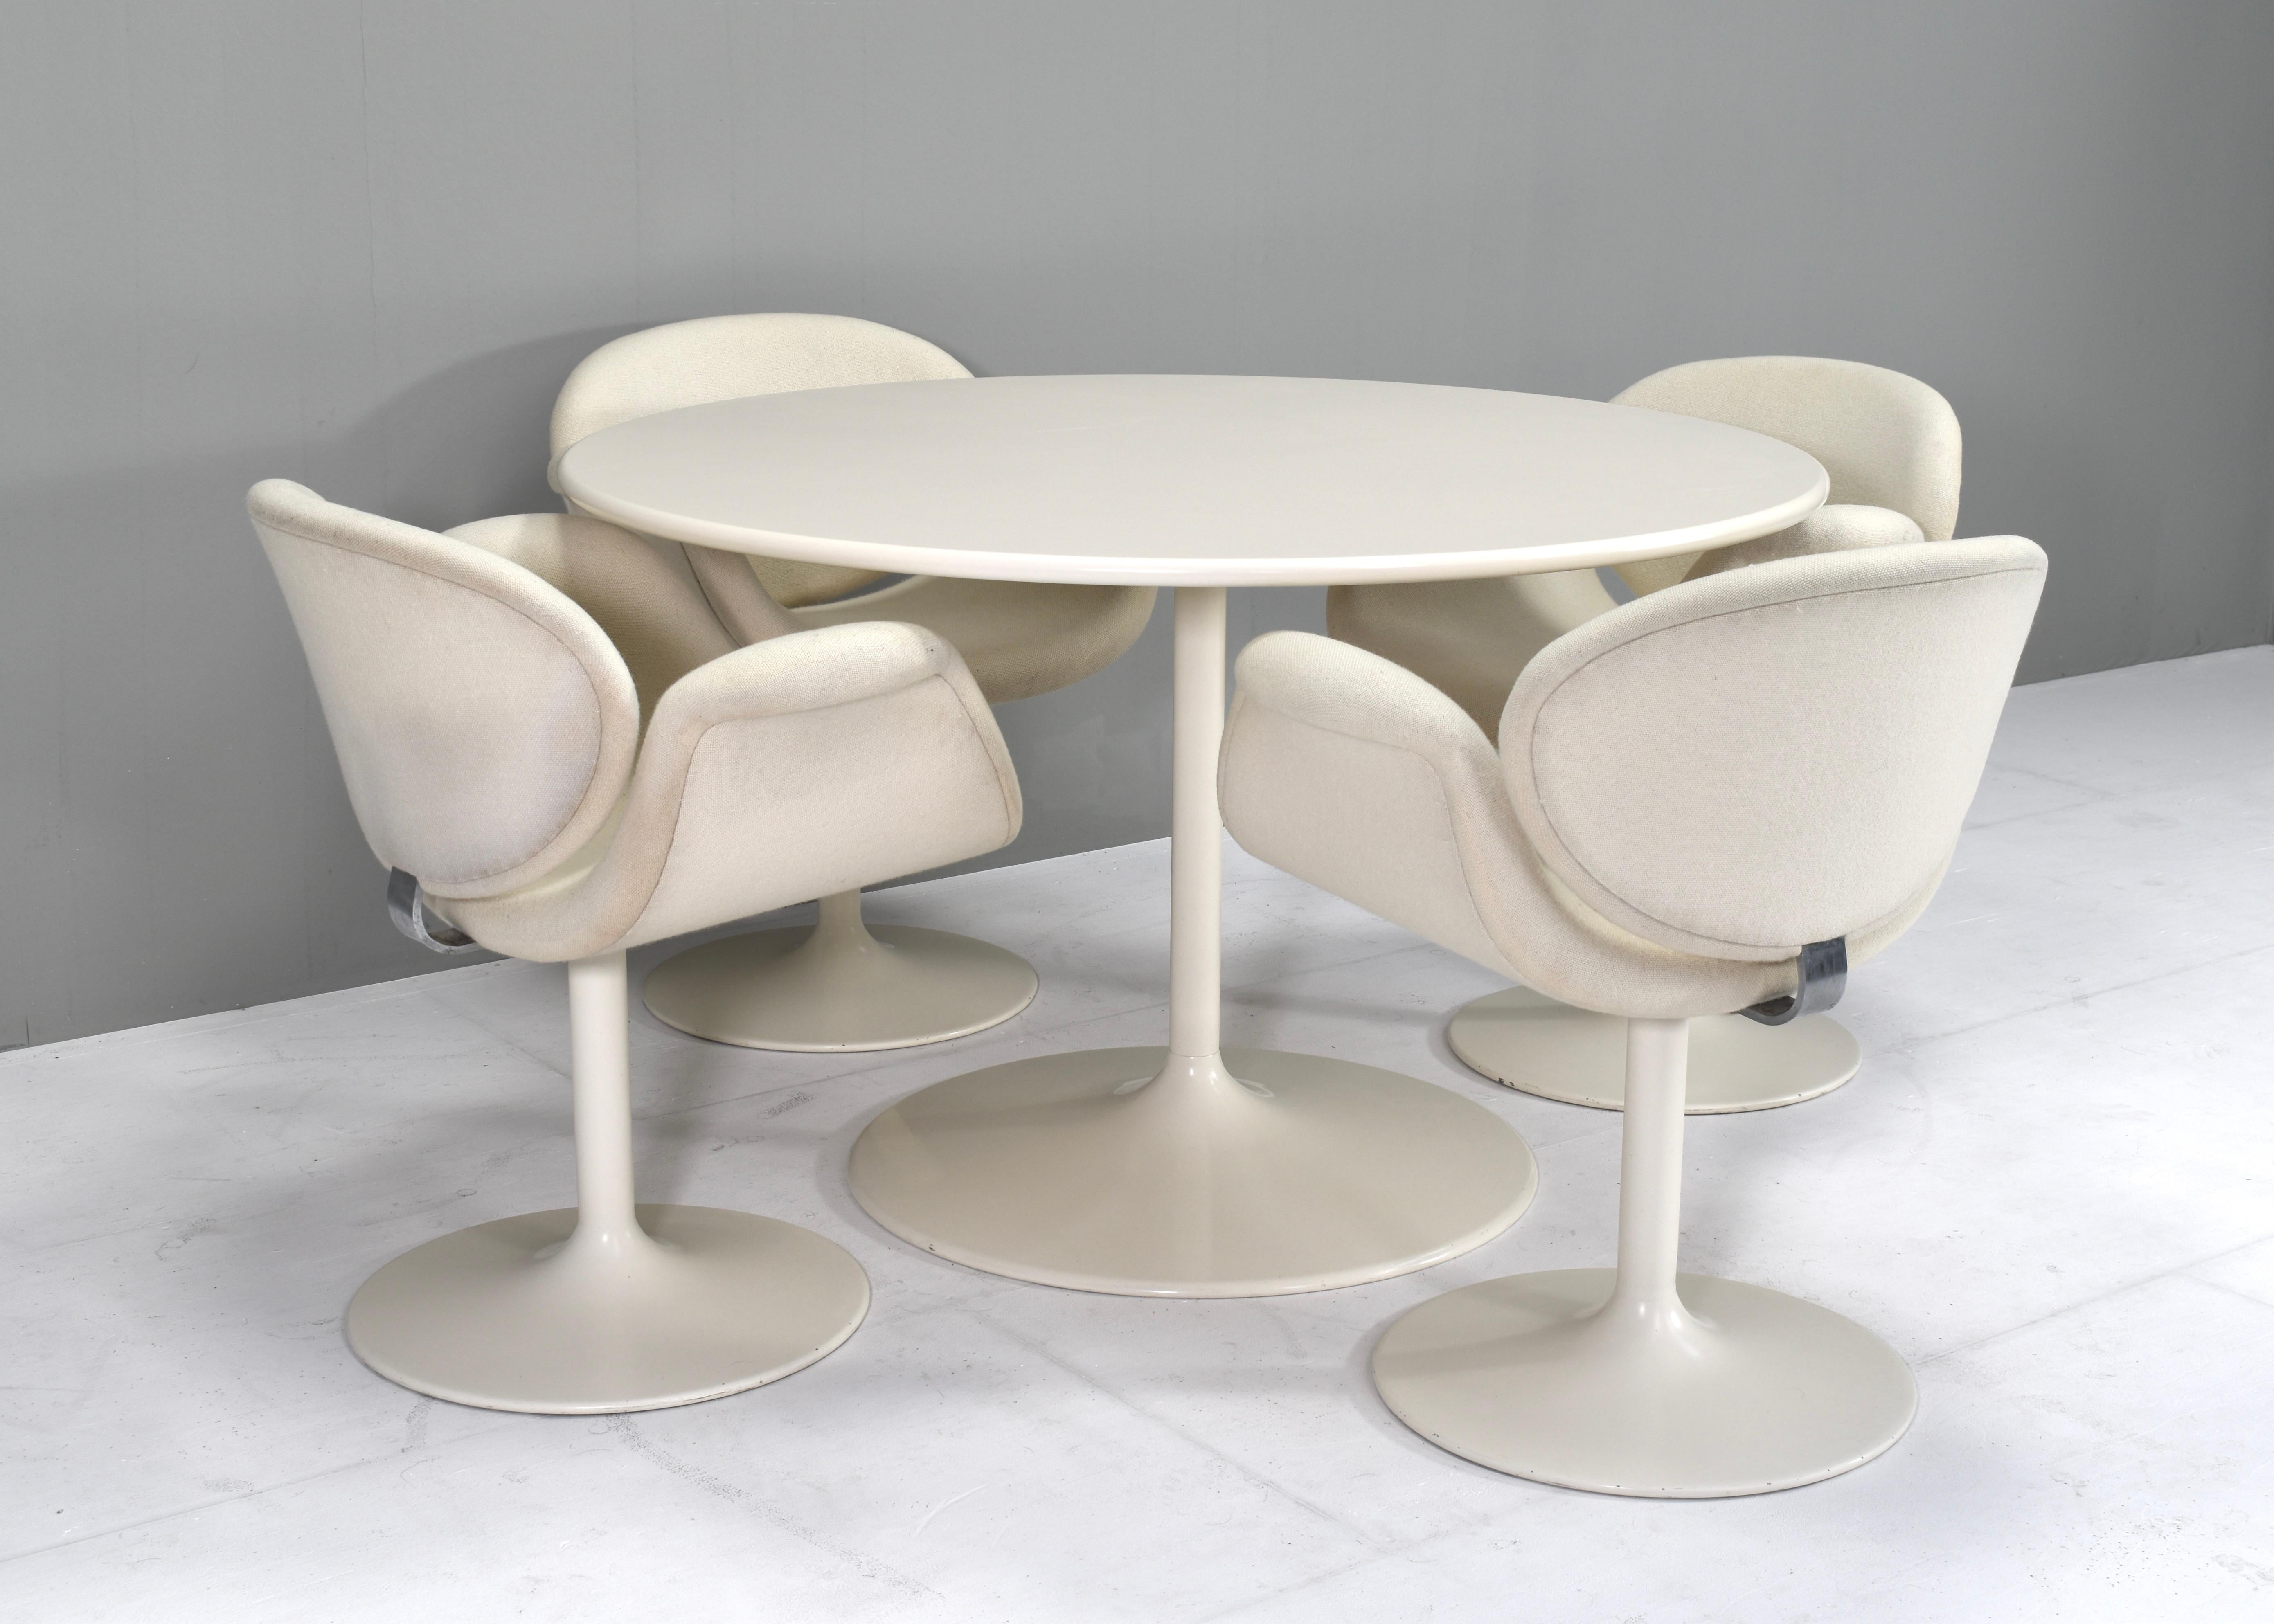 Dutch 1st Edition 'Tulip' Dining Set by Pierre Paulin for Artifort, Netherlands, 1965 For Sale